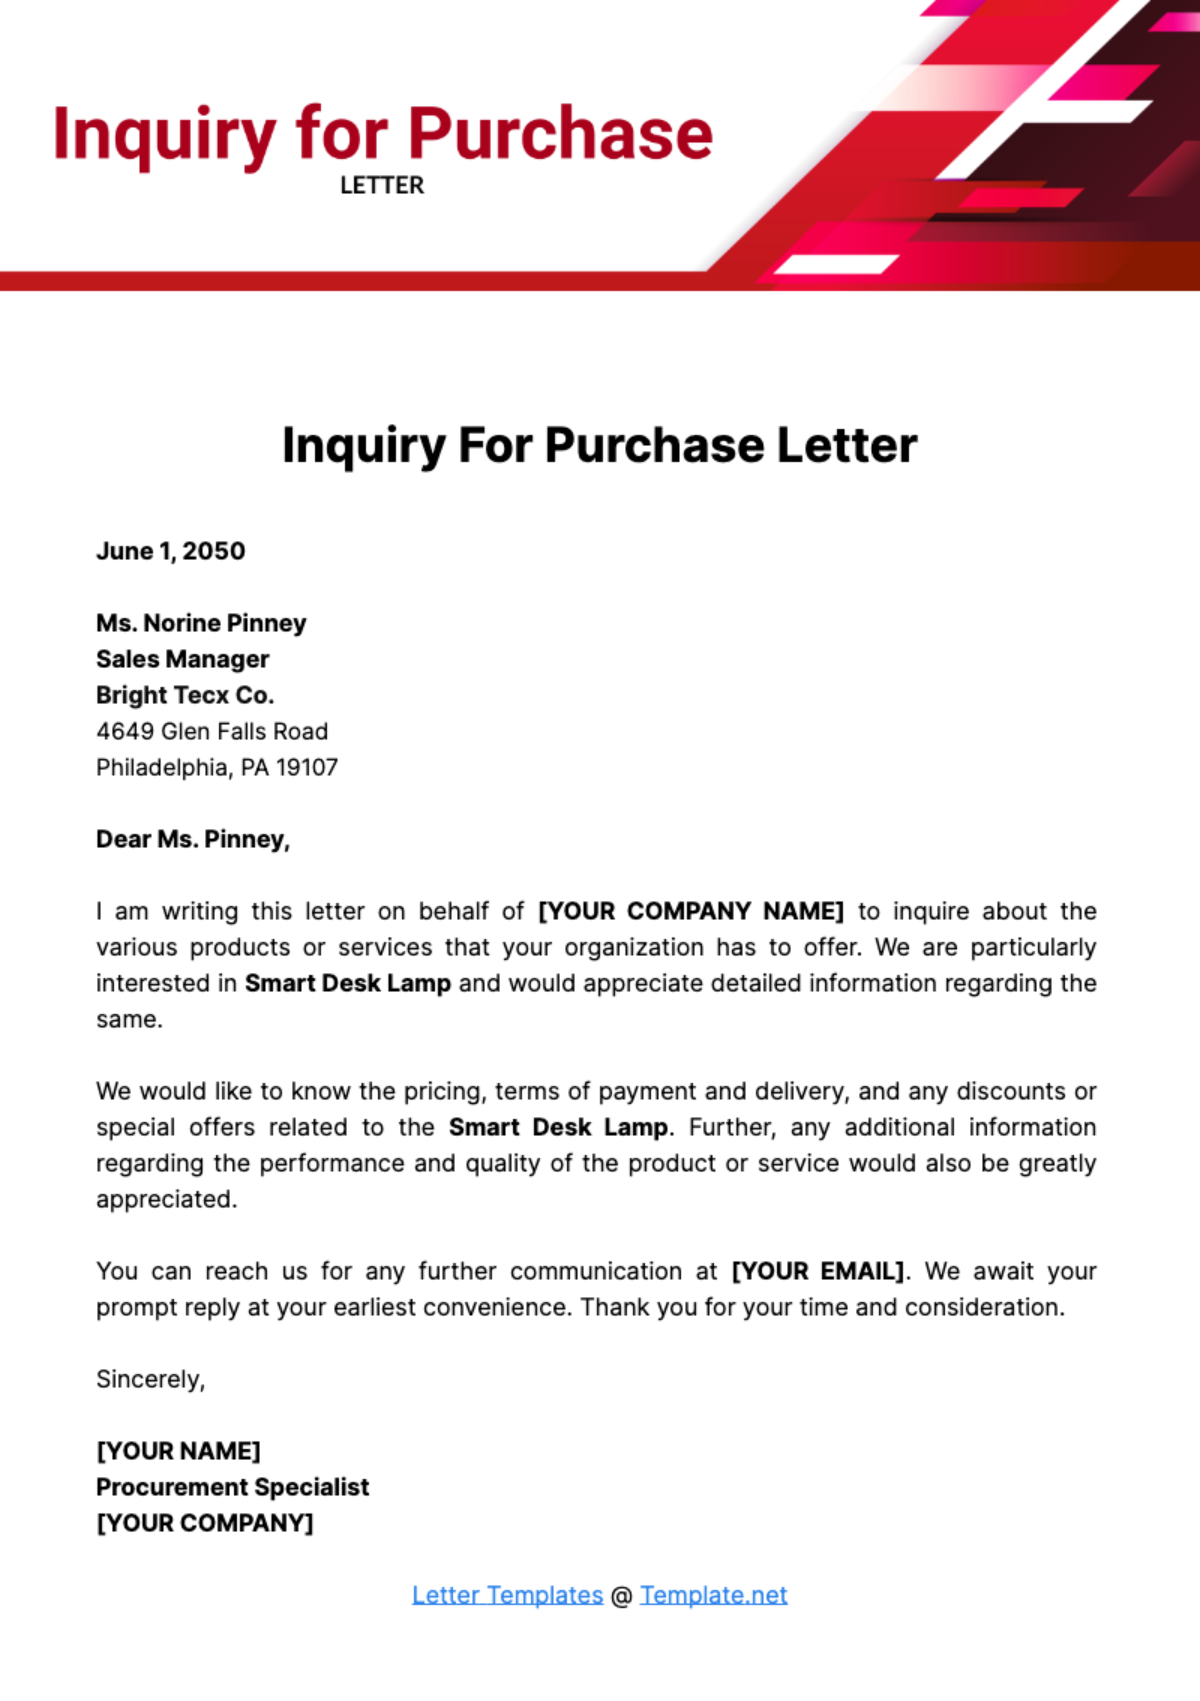 Inquiry for Purchase Letter Template